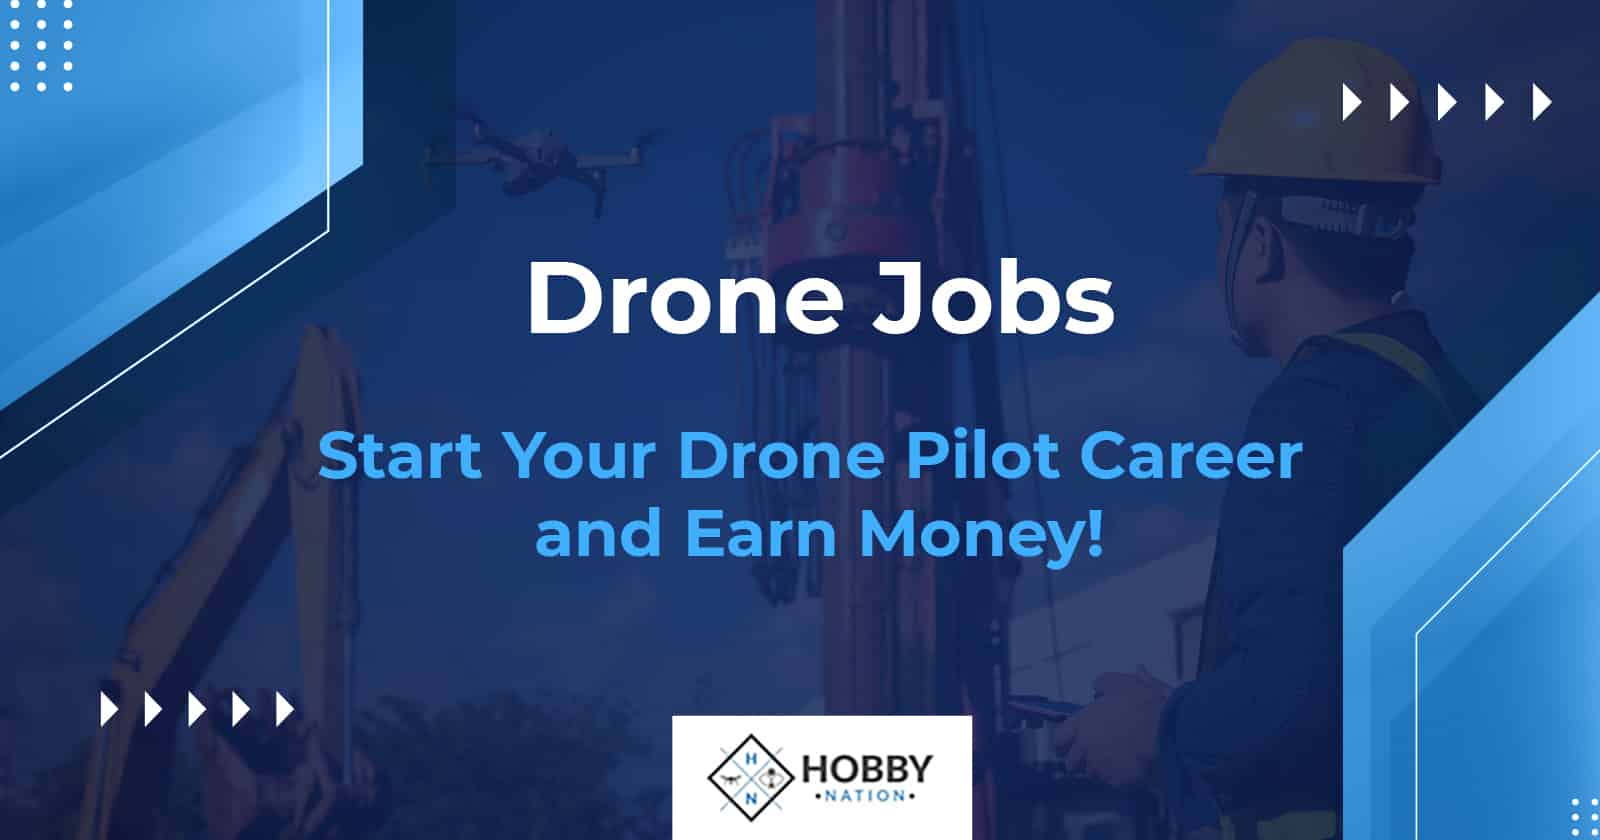 Drone Jobs – Start Your Drone Pilot Career and Earn Money!